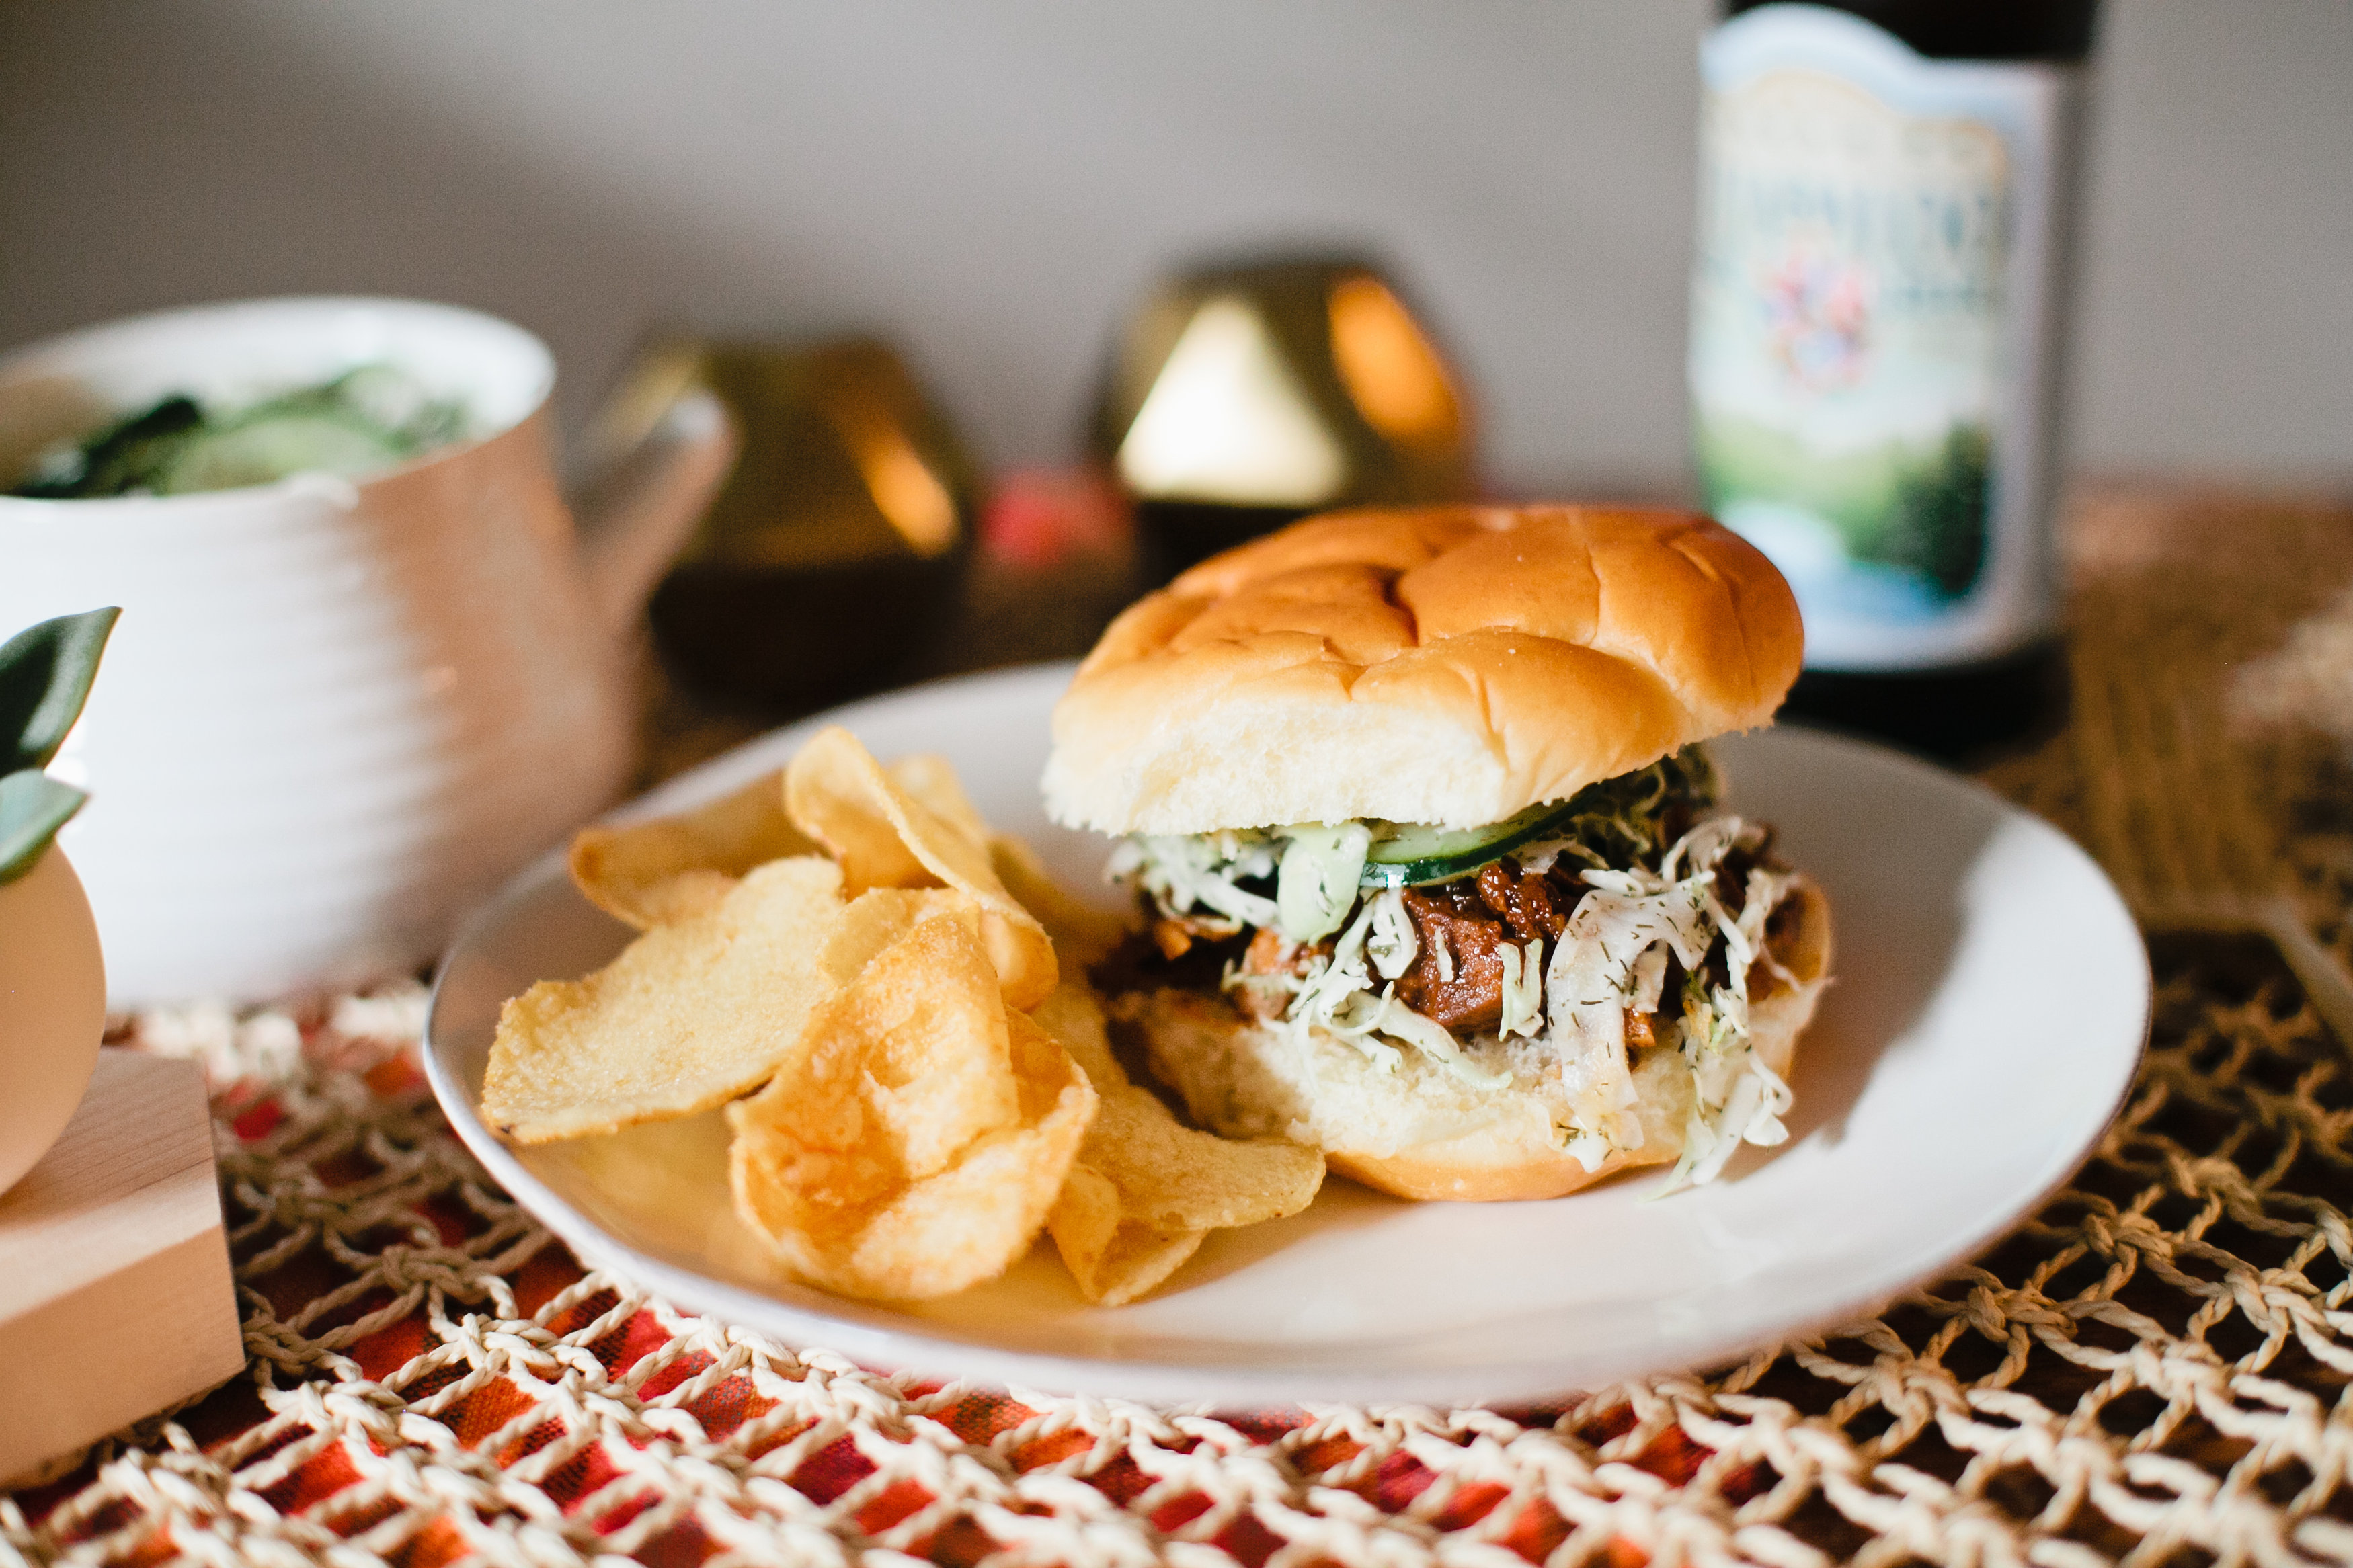 Eats – Pulled Pork Sandwich with Cucumber Slaw